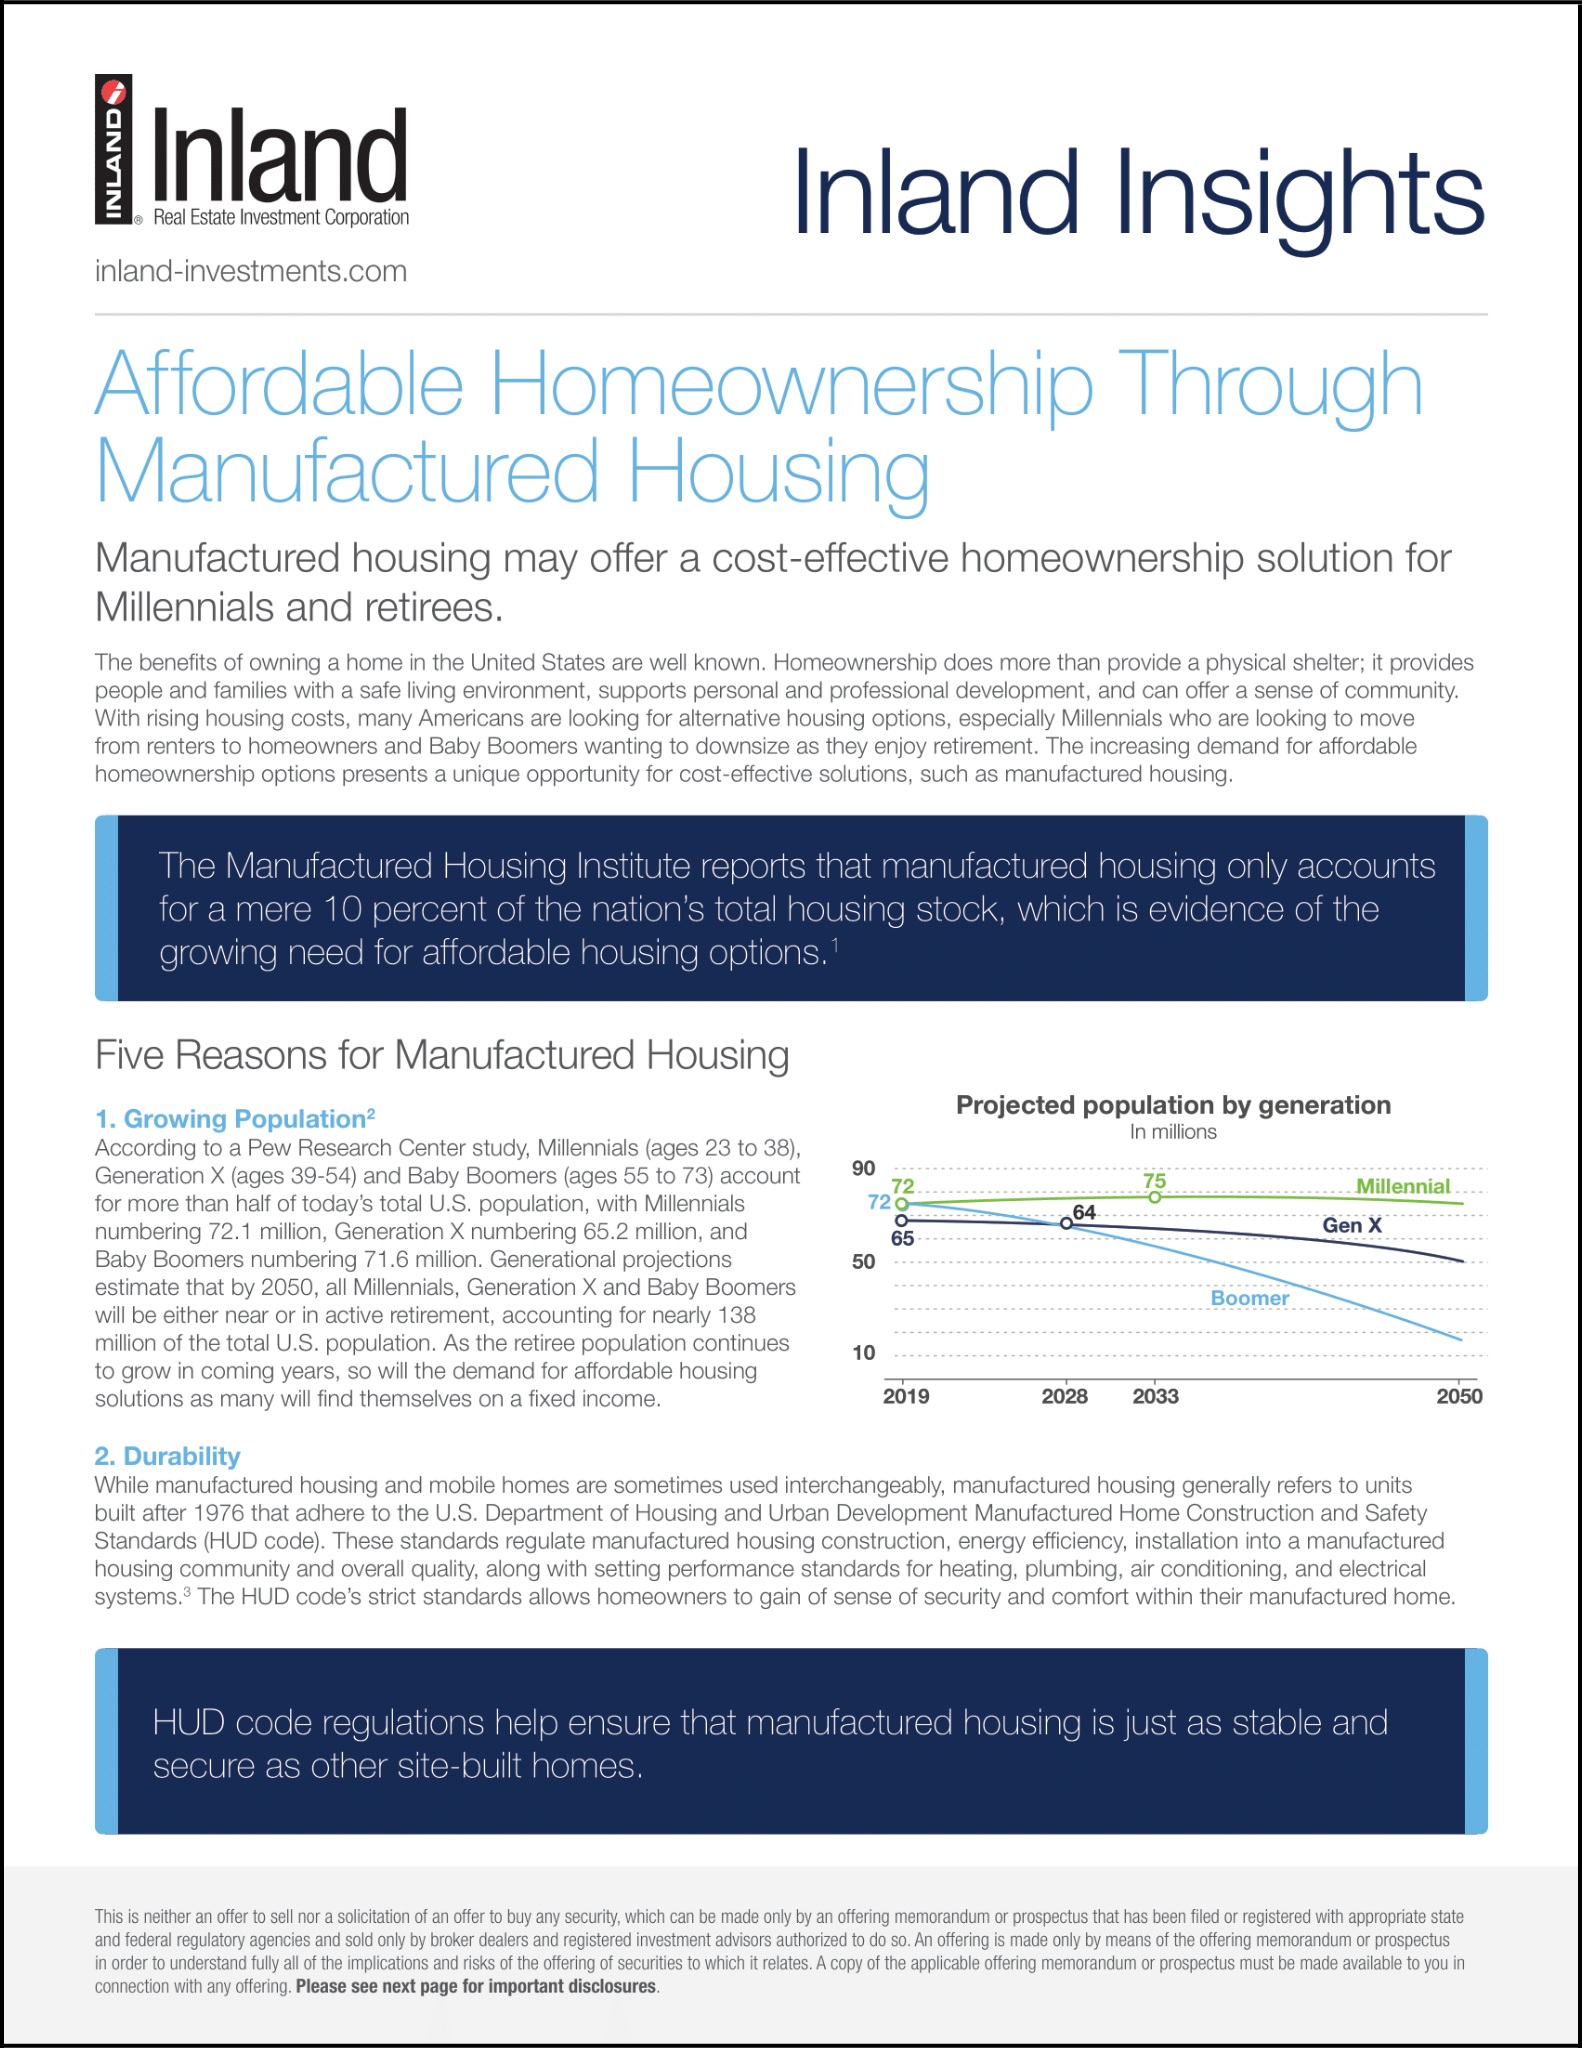 Inland-Insights-Affordable-Homeownership-Manufactured-Housing-1